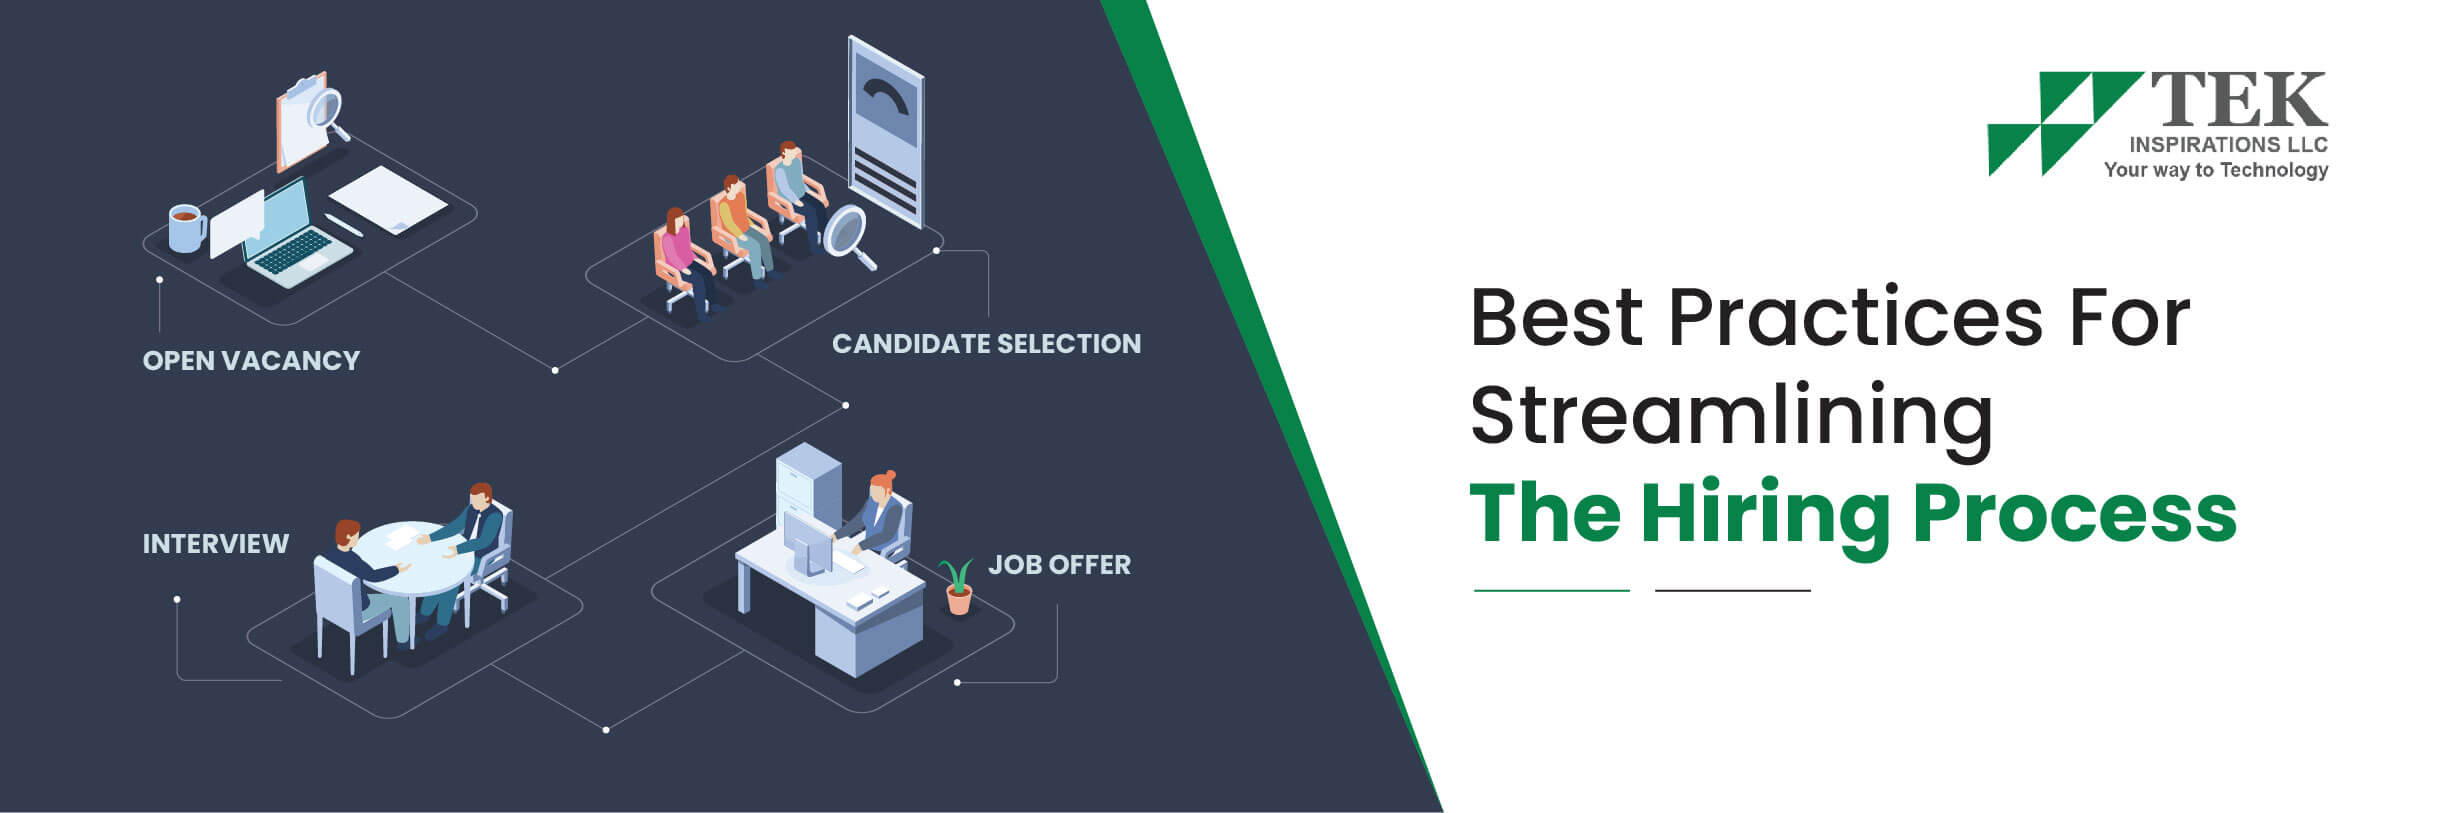 Best Practices For Streamlining The Hiring Process